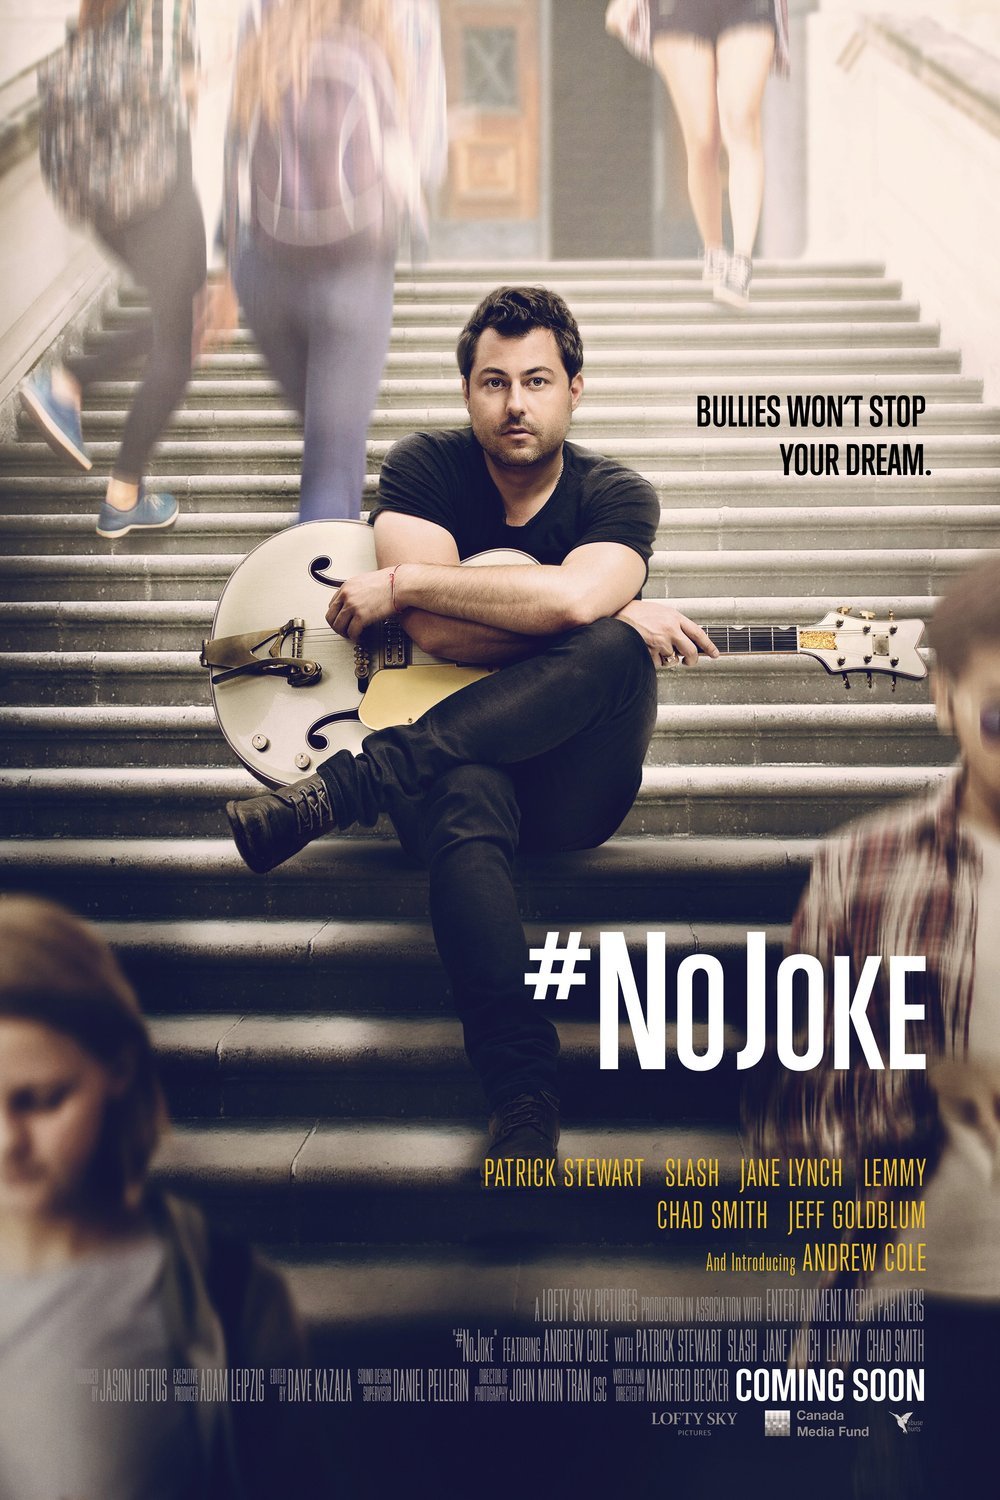 Poster of the movie #NoJoke